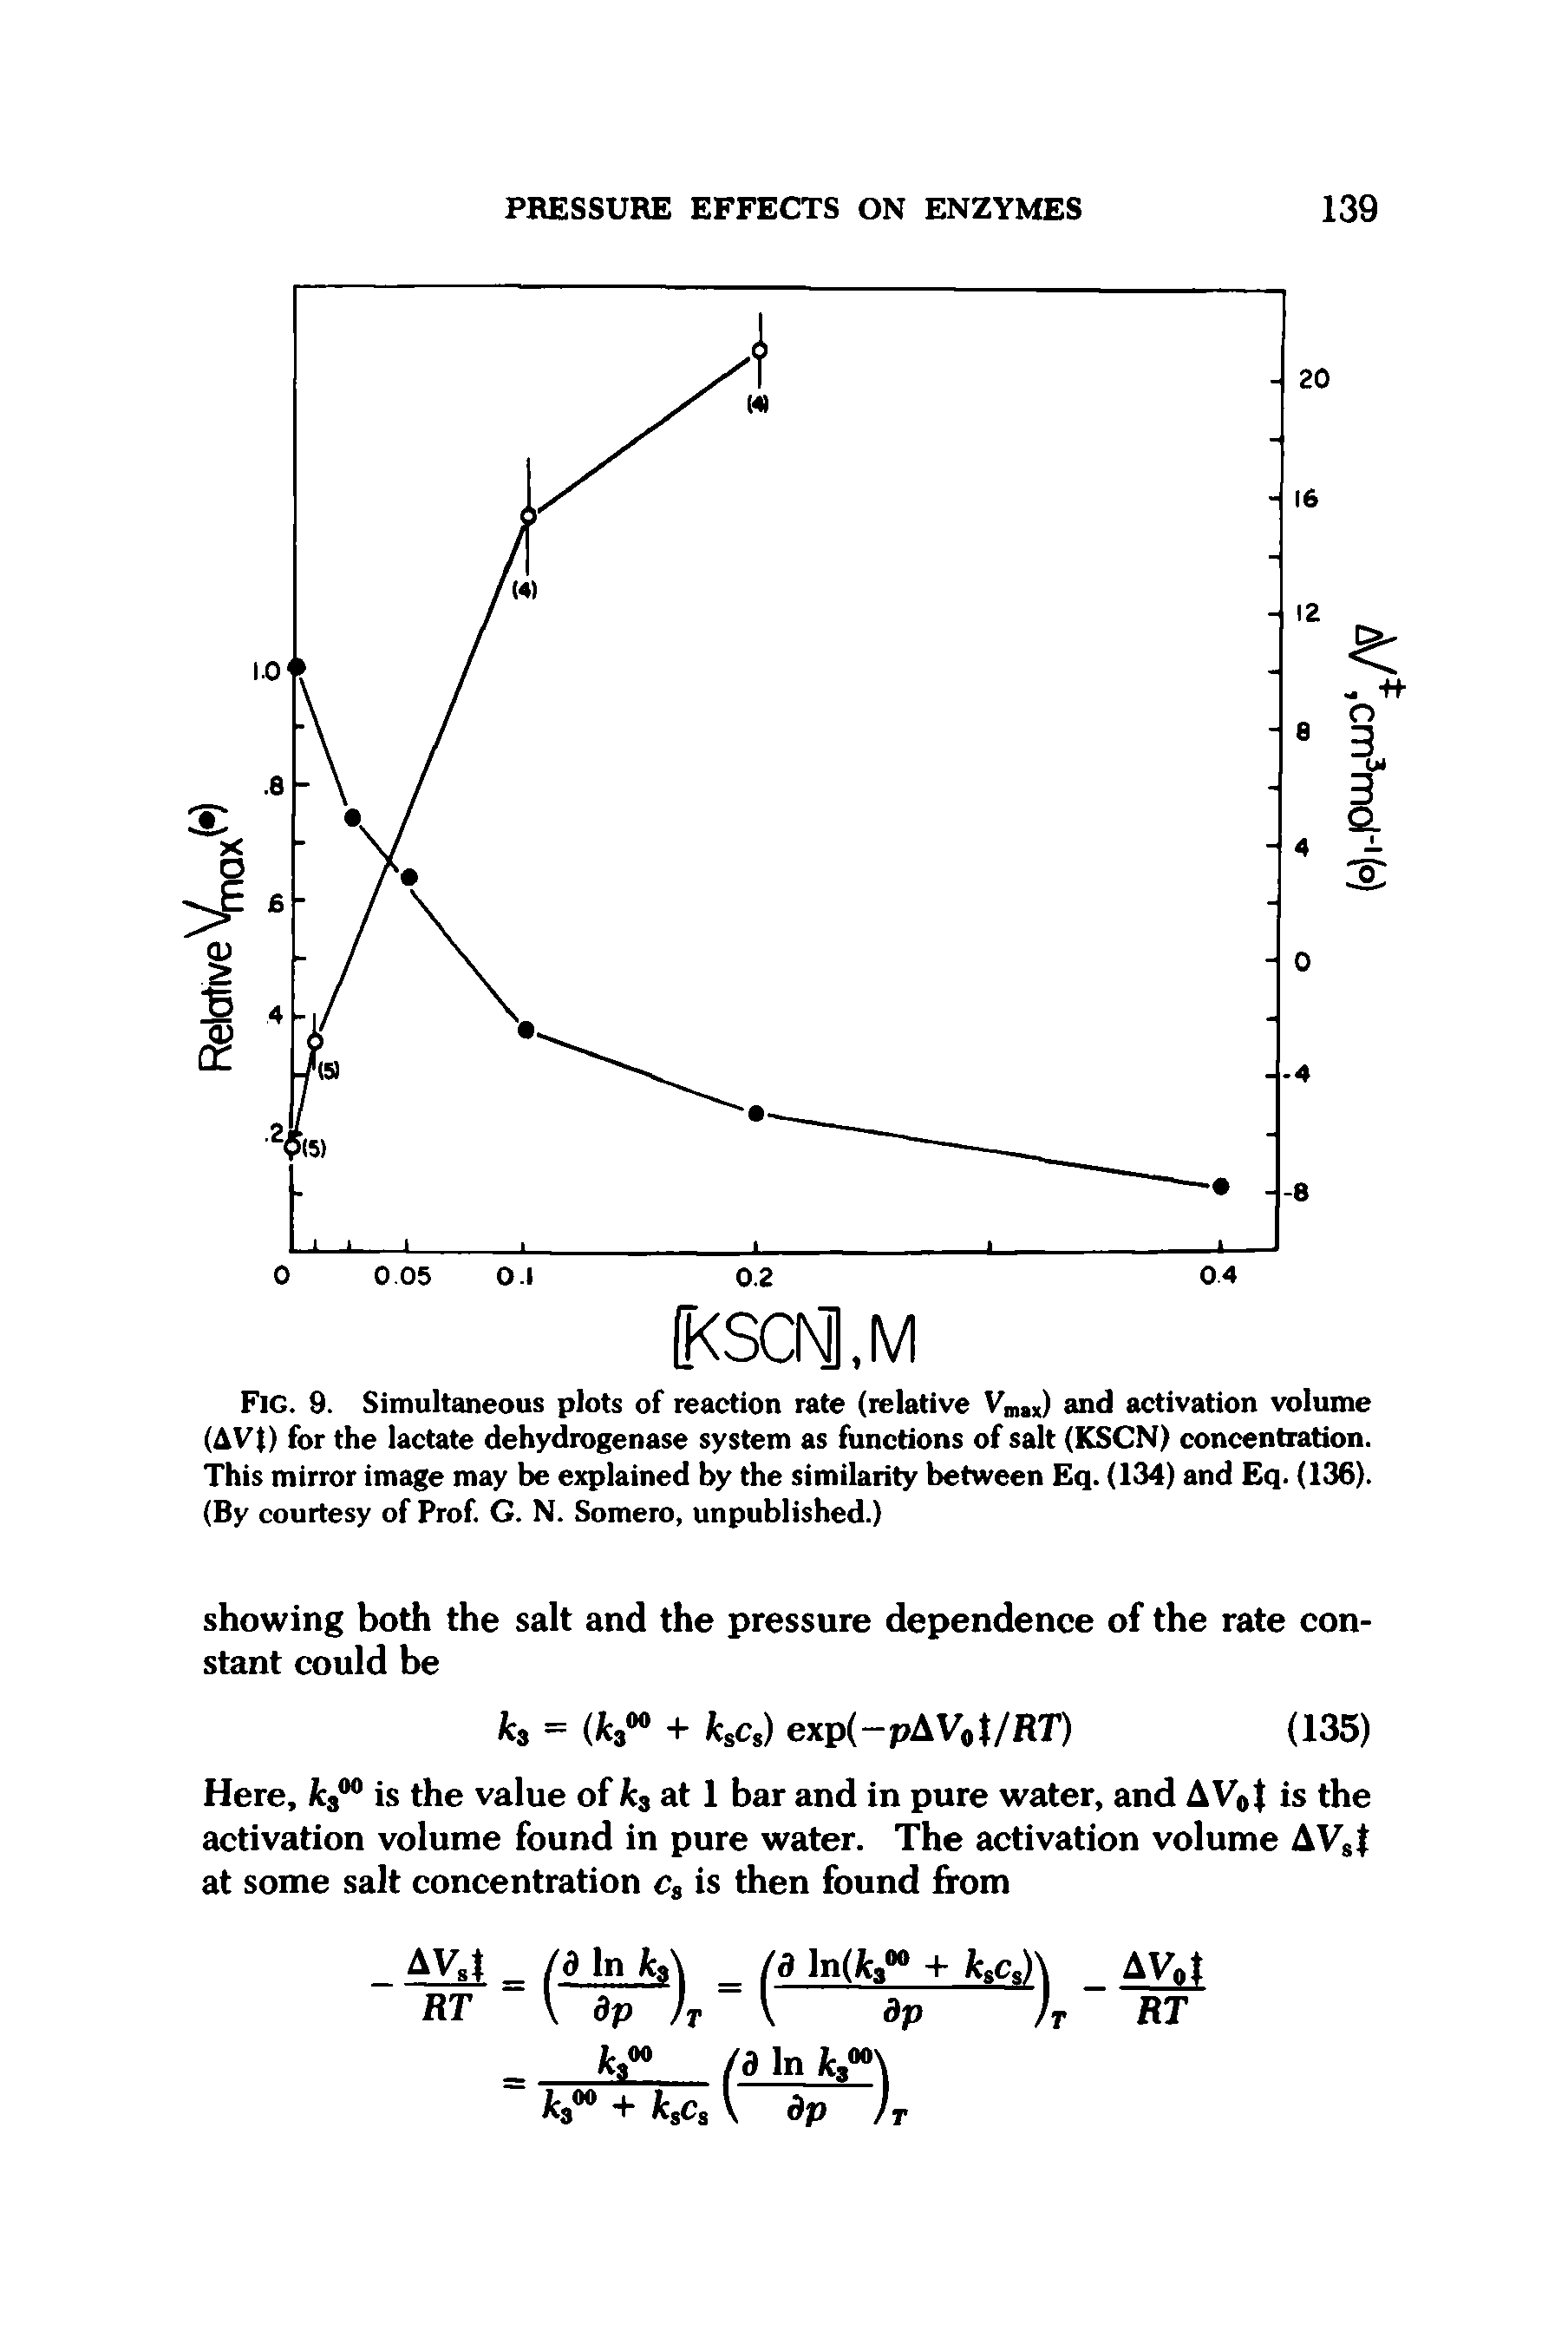 Fig. 9. Simultaneous plots of reaction rate (relative Vmax) and activation volume (AV() for the lactate dehydrogenase system as functions of salt (KSCN) concentration. This mirror image may be explained by the similarity between Eq. (134) and Eq. (136). (By courtesy of Prof. G. N. Somero, unpublished.)...